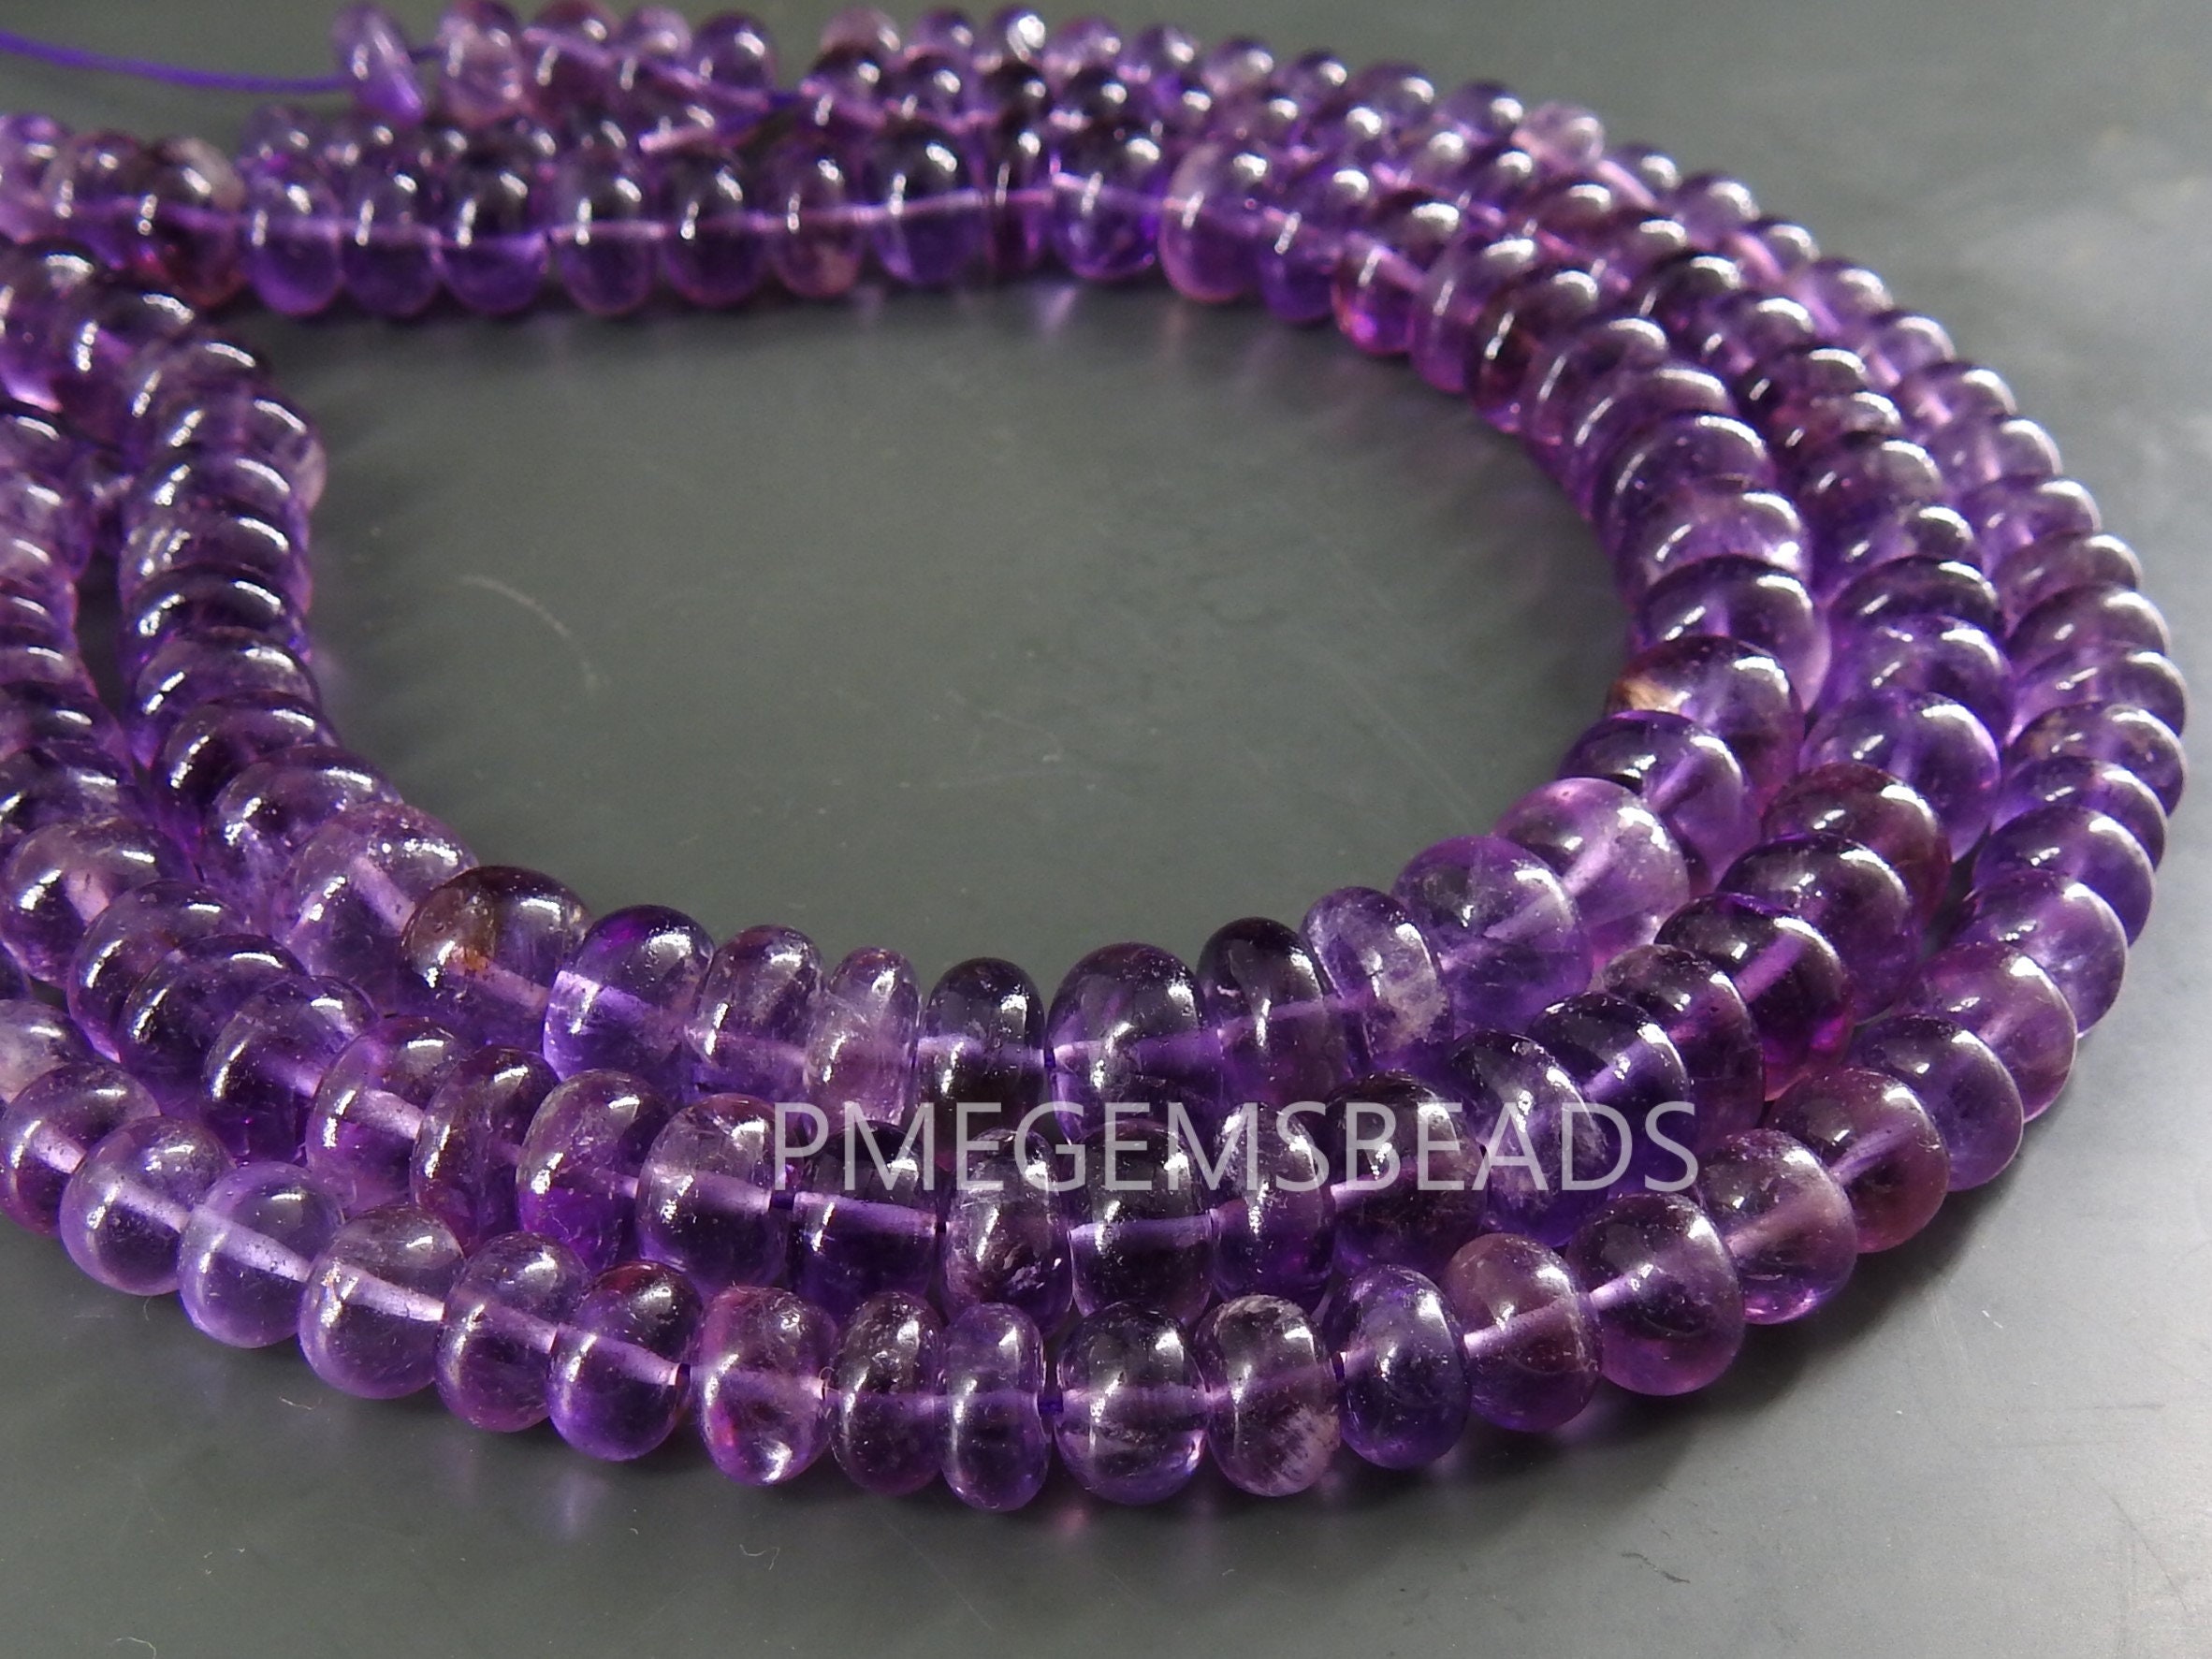 Amethyst Smooth Roundel Beads,Handmade,Loose Stone,For Making Jewelry,Necklace,12Inch Strand,Wholesaler,Supplies,100%Natural PME-B9 | Save 33% - Rajasthan Living 11